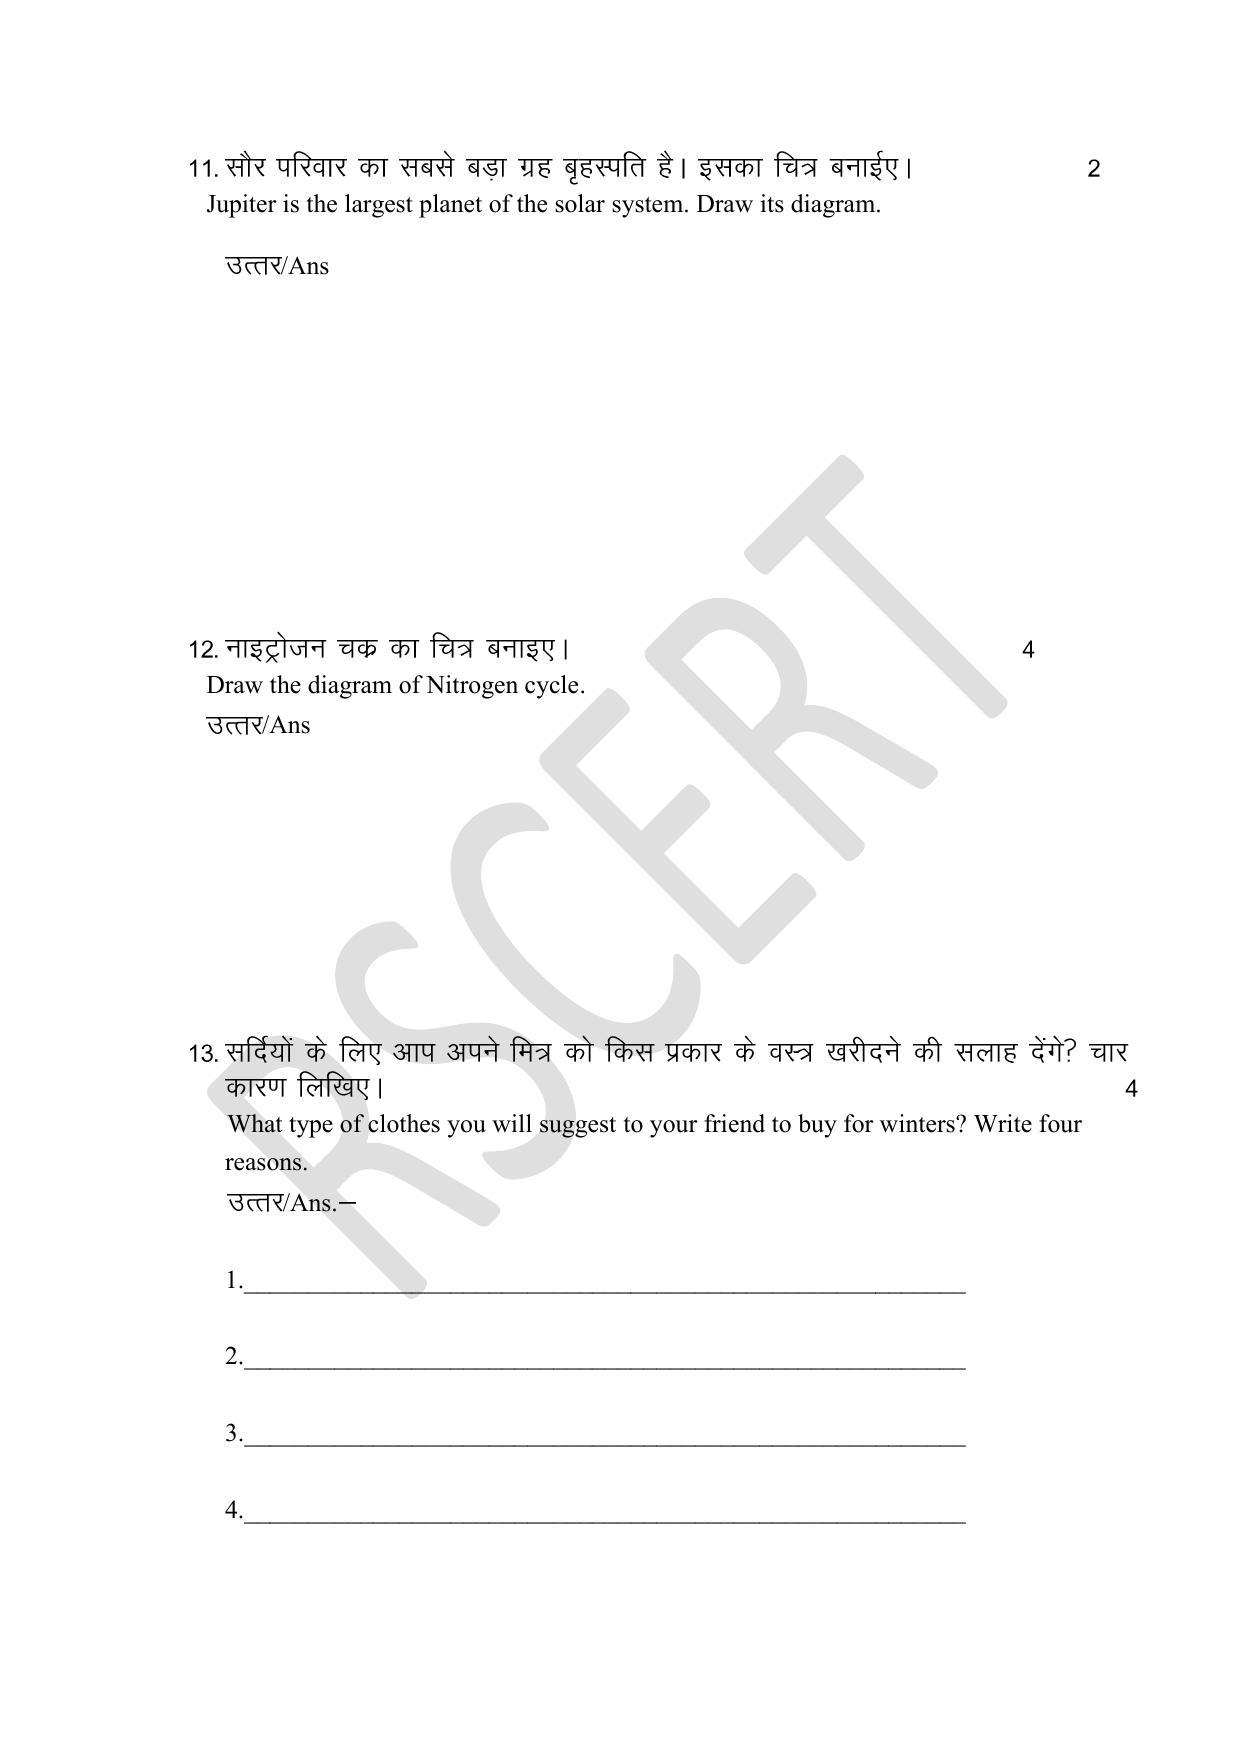 RBSE Class 8 Math & Science Sample Paper 2023 - Page 14